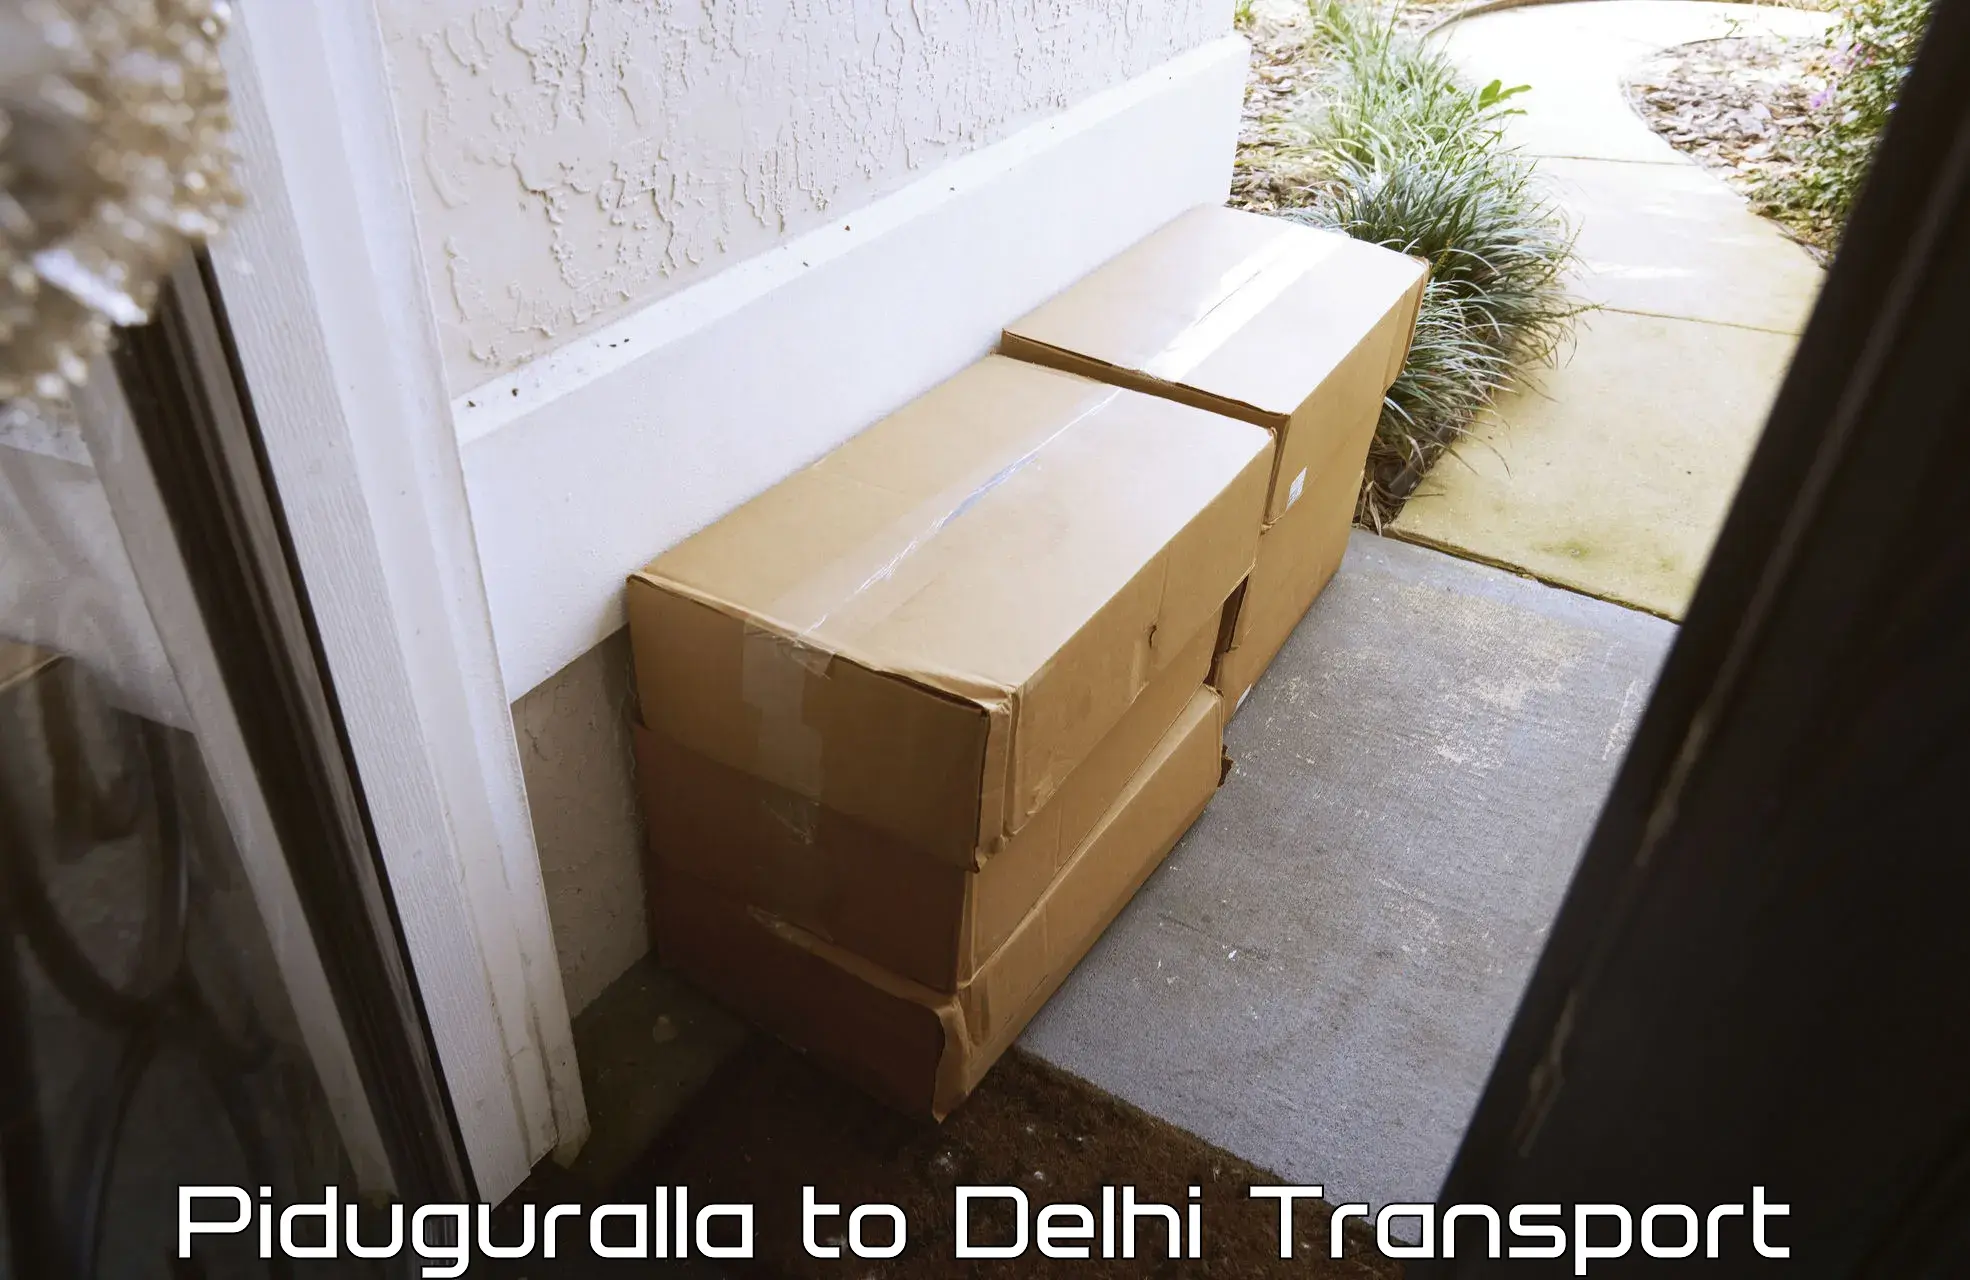 Daily parcel service transport Piduguralla to NCR